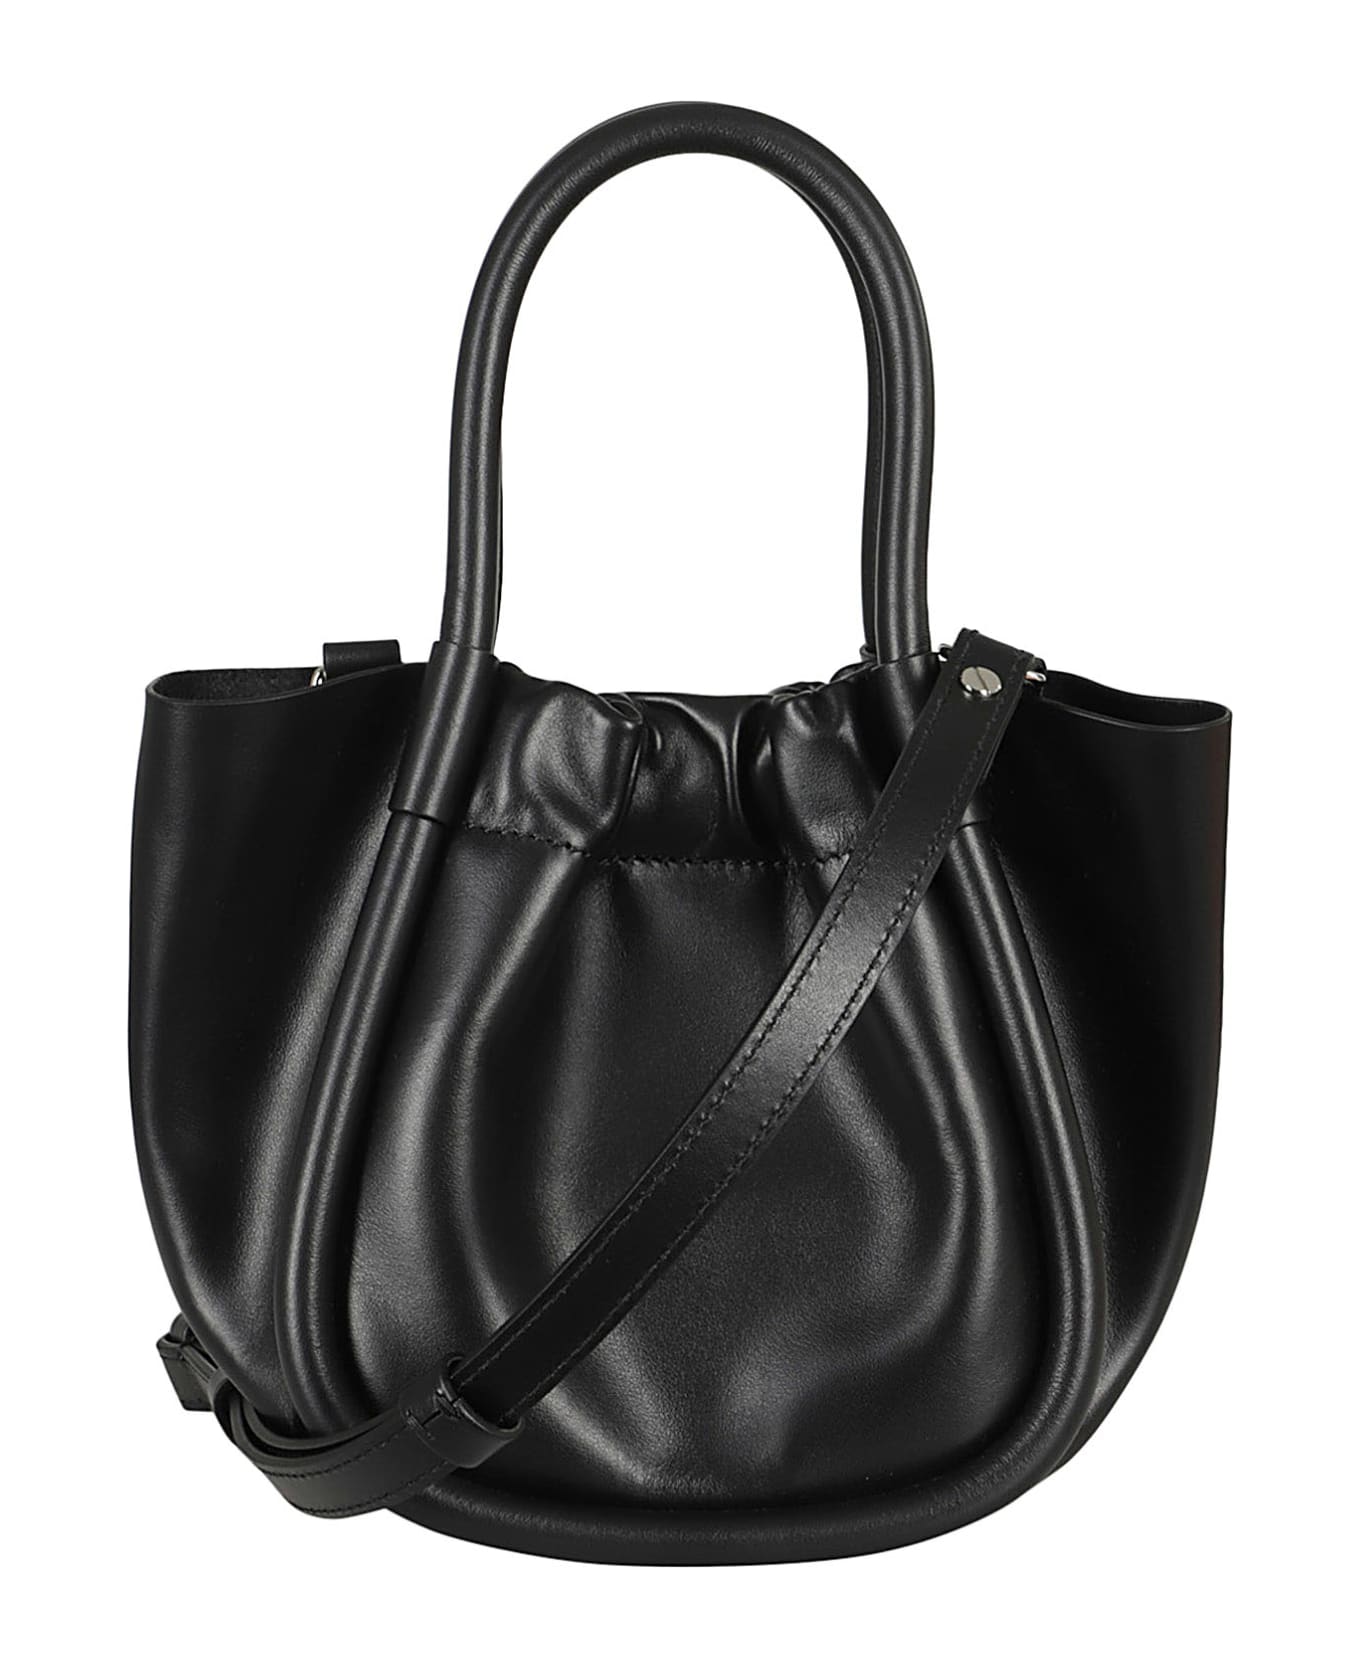 Proenza Schouler Extra Small Ruched Tote